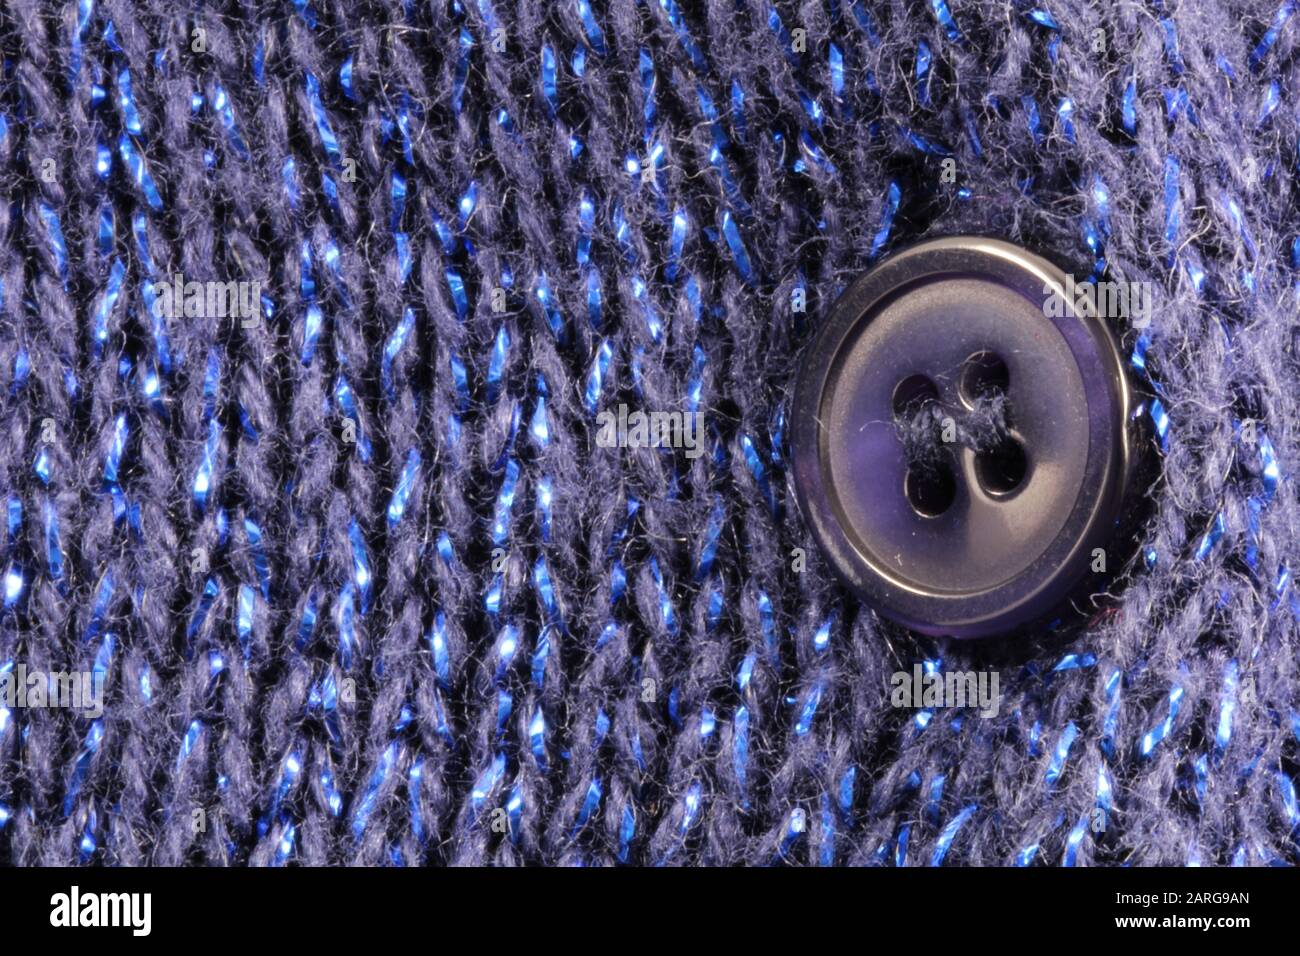 Close-up Image of Navy Blue Knit Texture of Sweater with Blue Button Stock Photo